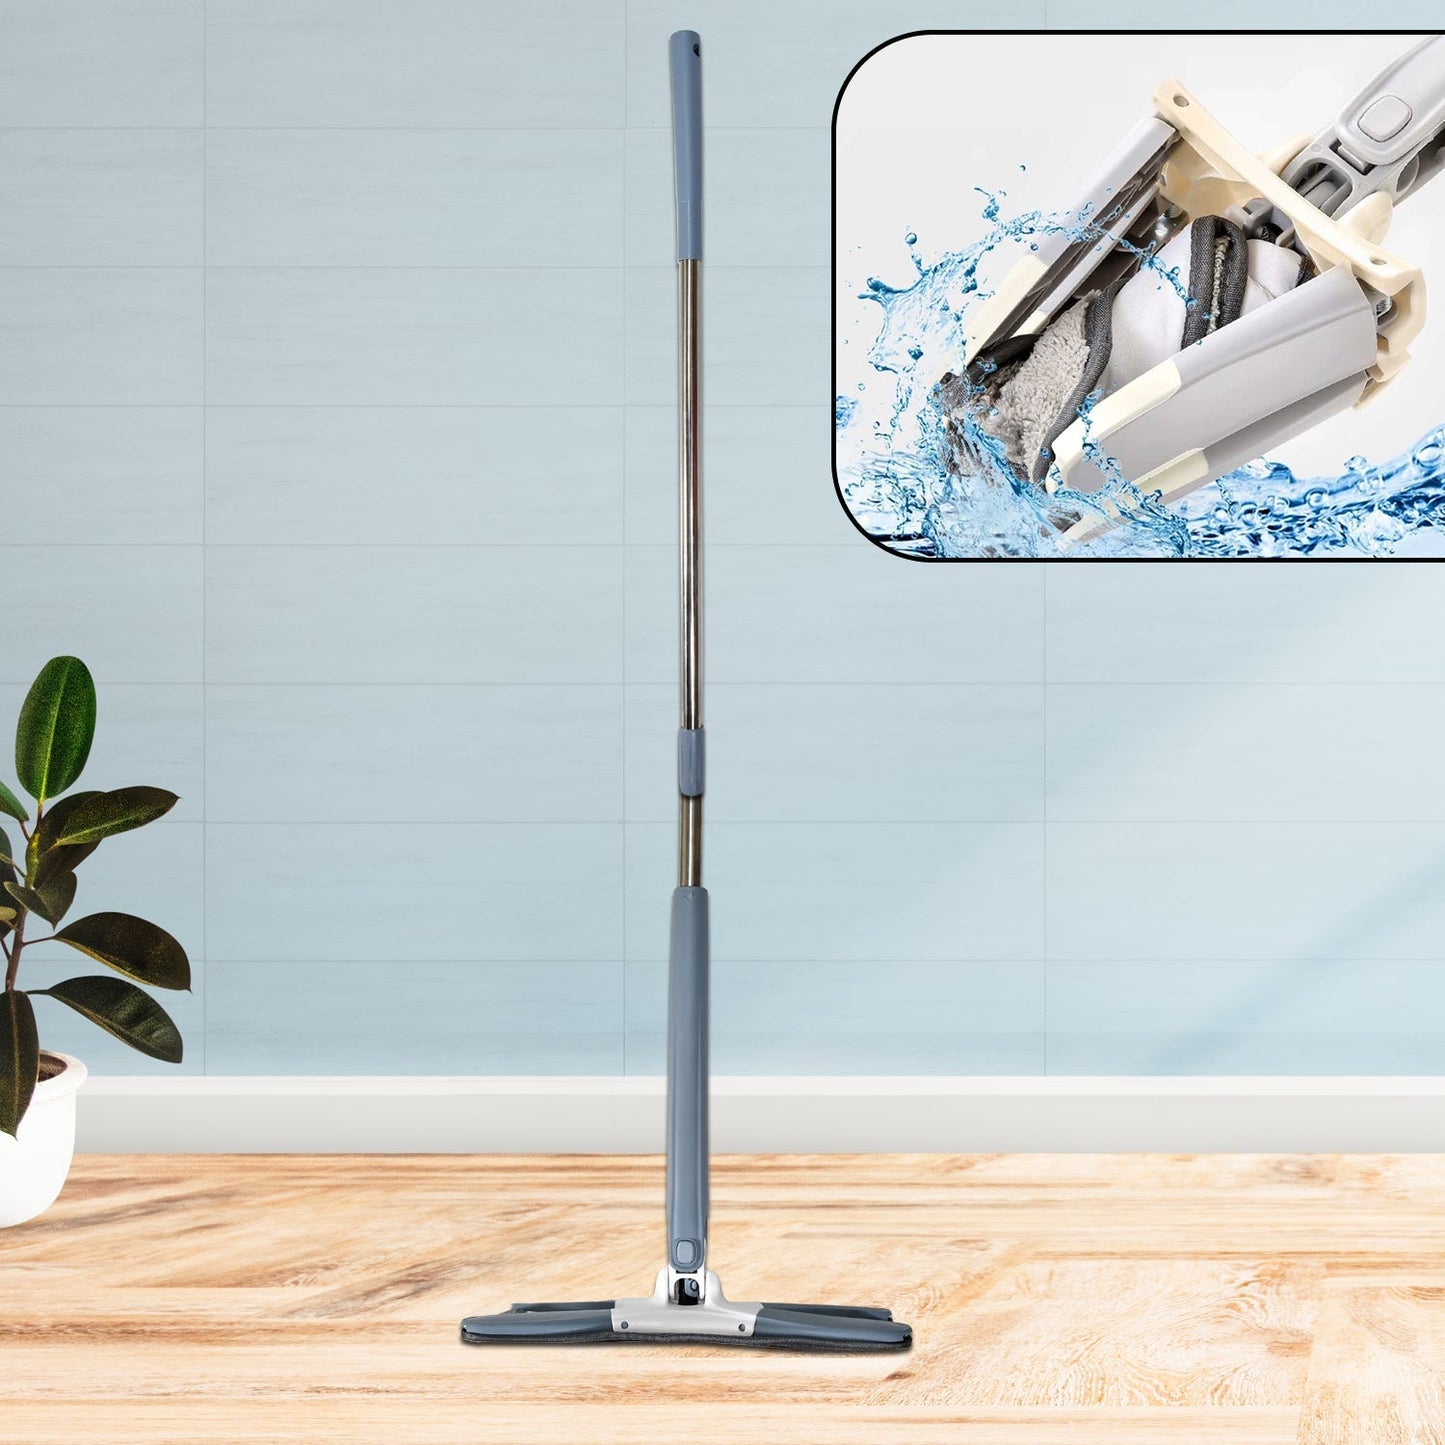 4874 X Shape Mop or Floor Cleaning Hands-Free Squeeze Microfiber Flat Mop System 360° Flexible Head, Wet and Dry mop for Home Kitchen with 1 Super-absorbent Microfiber Pads. DeoDap